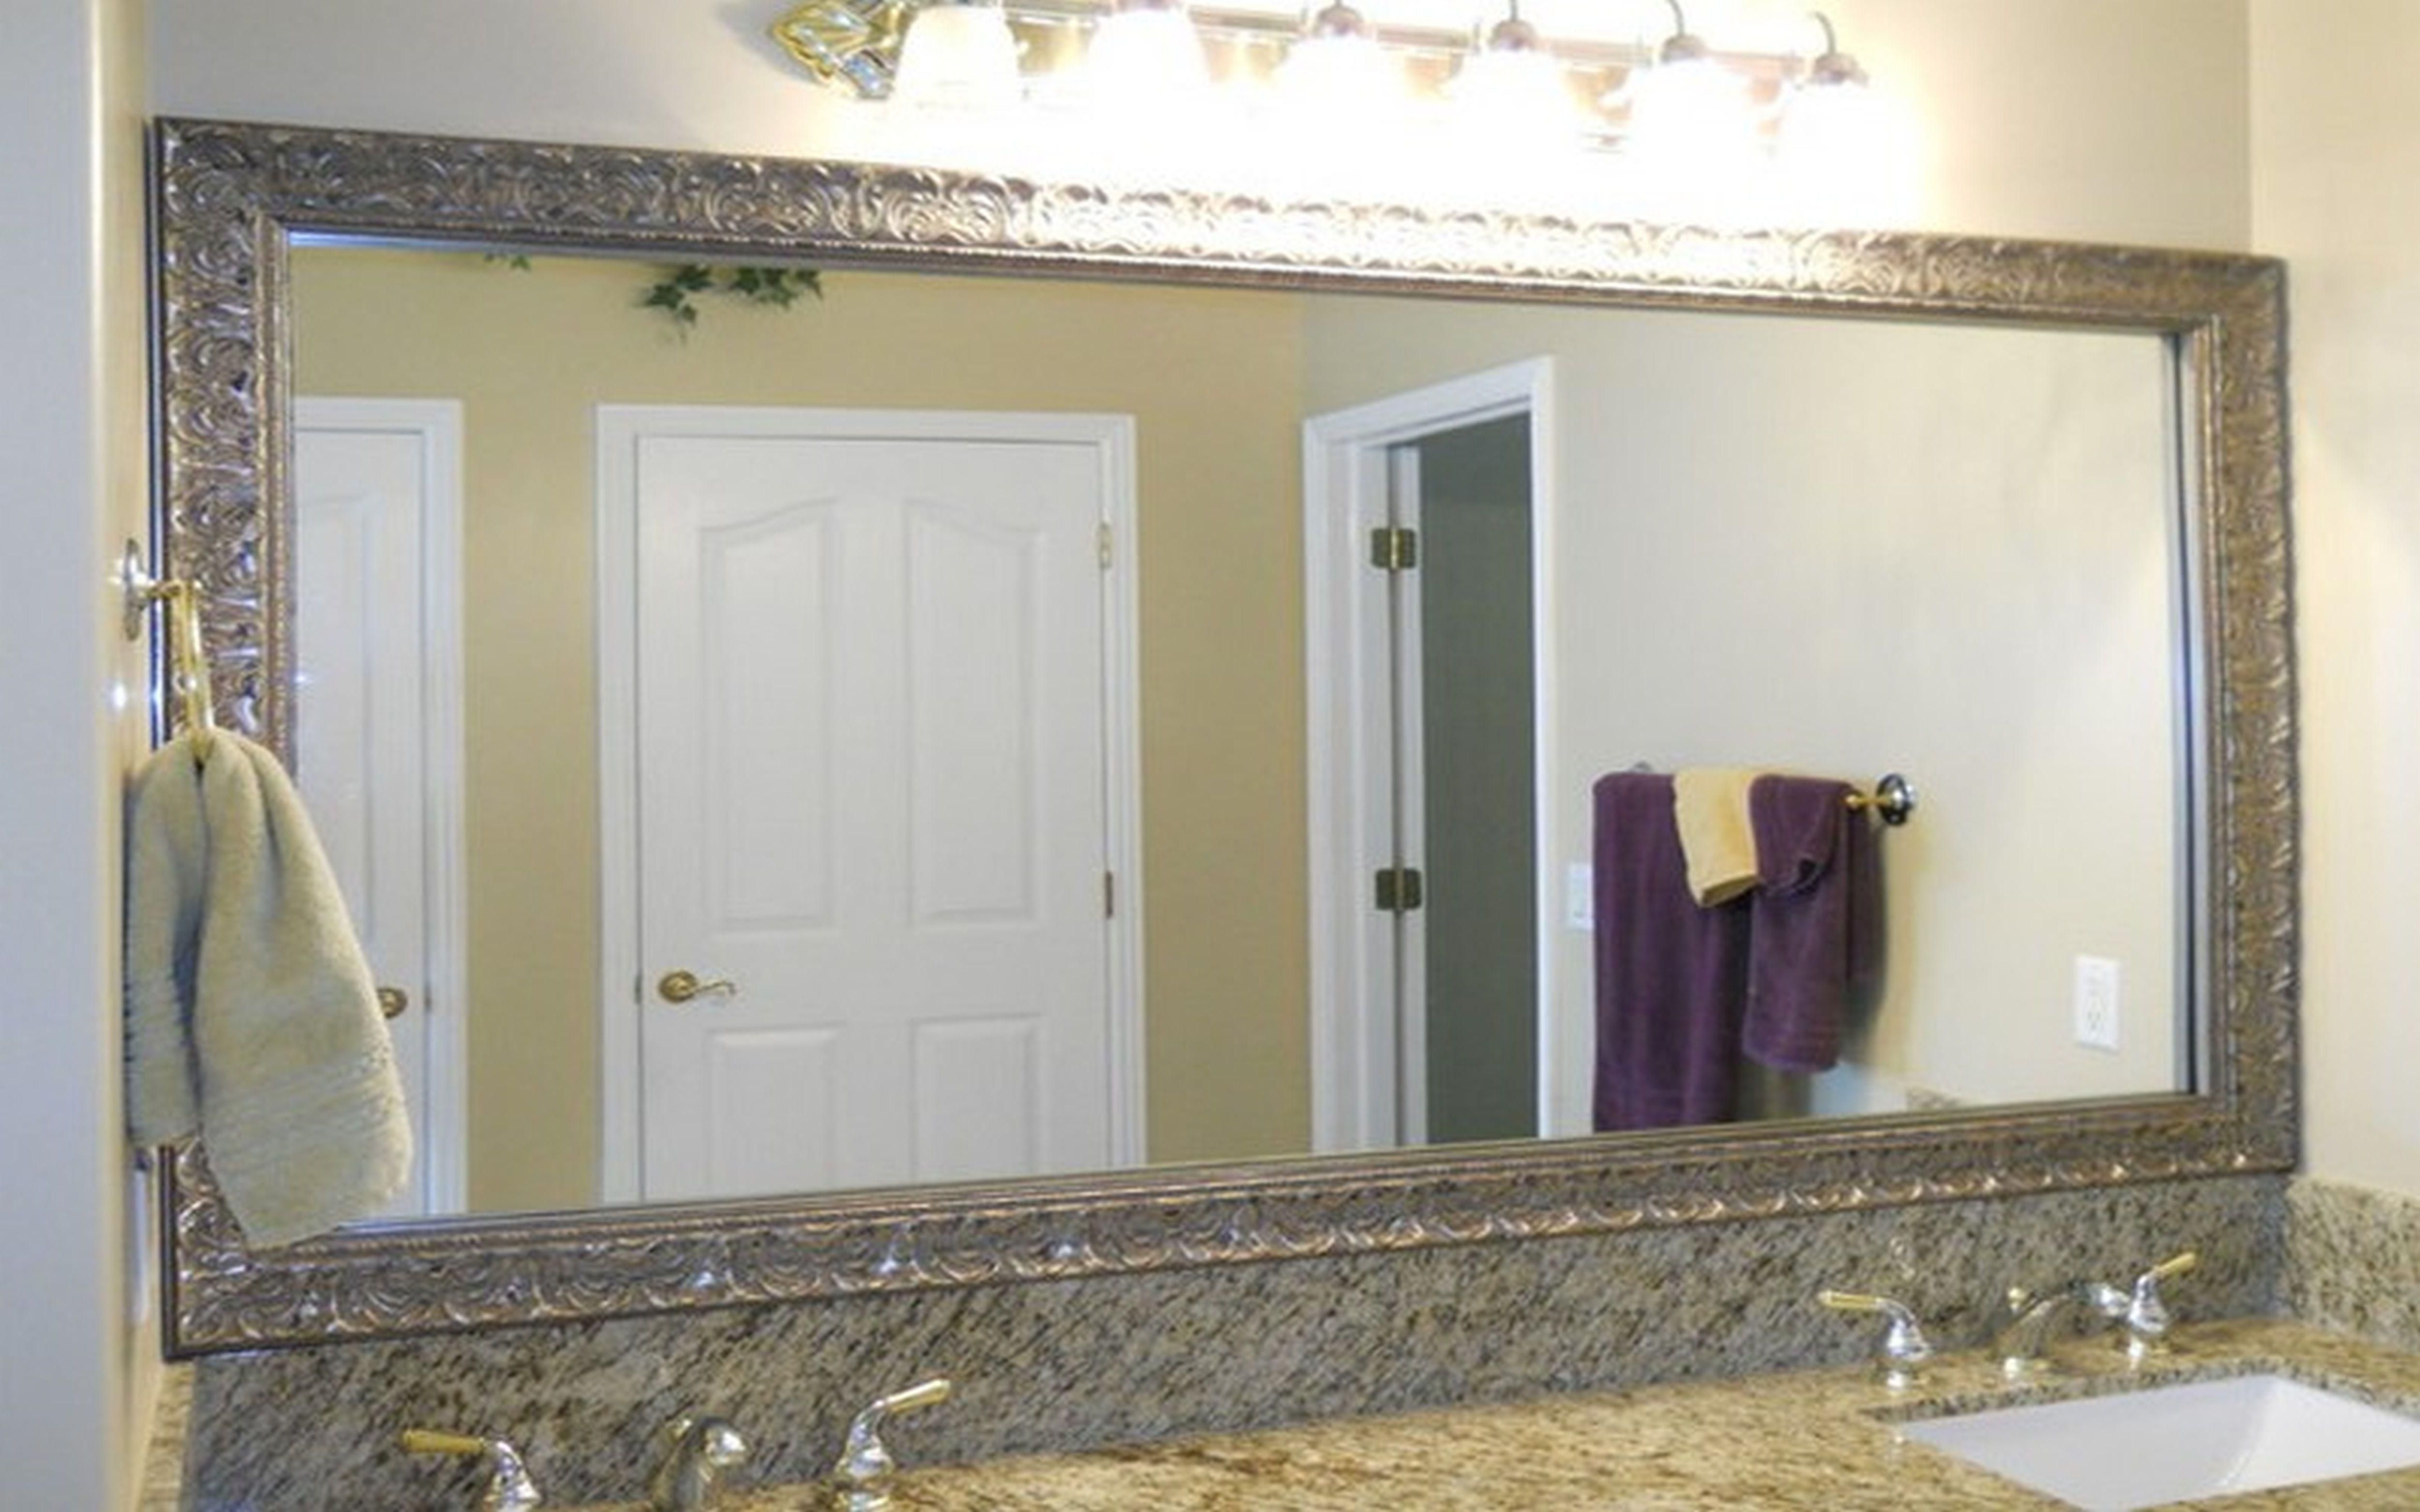 Bathroom Furniture Wall Mirrors And Gold Rustic Ideas Framed For In Large Mirrors For Bathroom Walls (Photo 17 of 20)